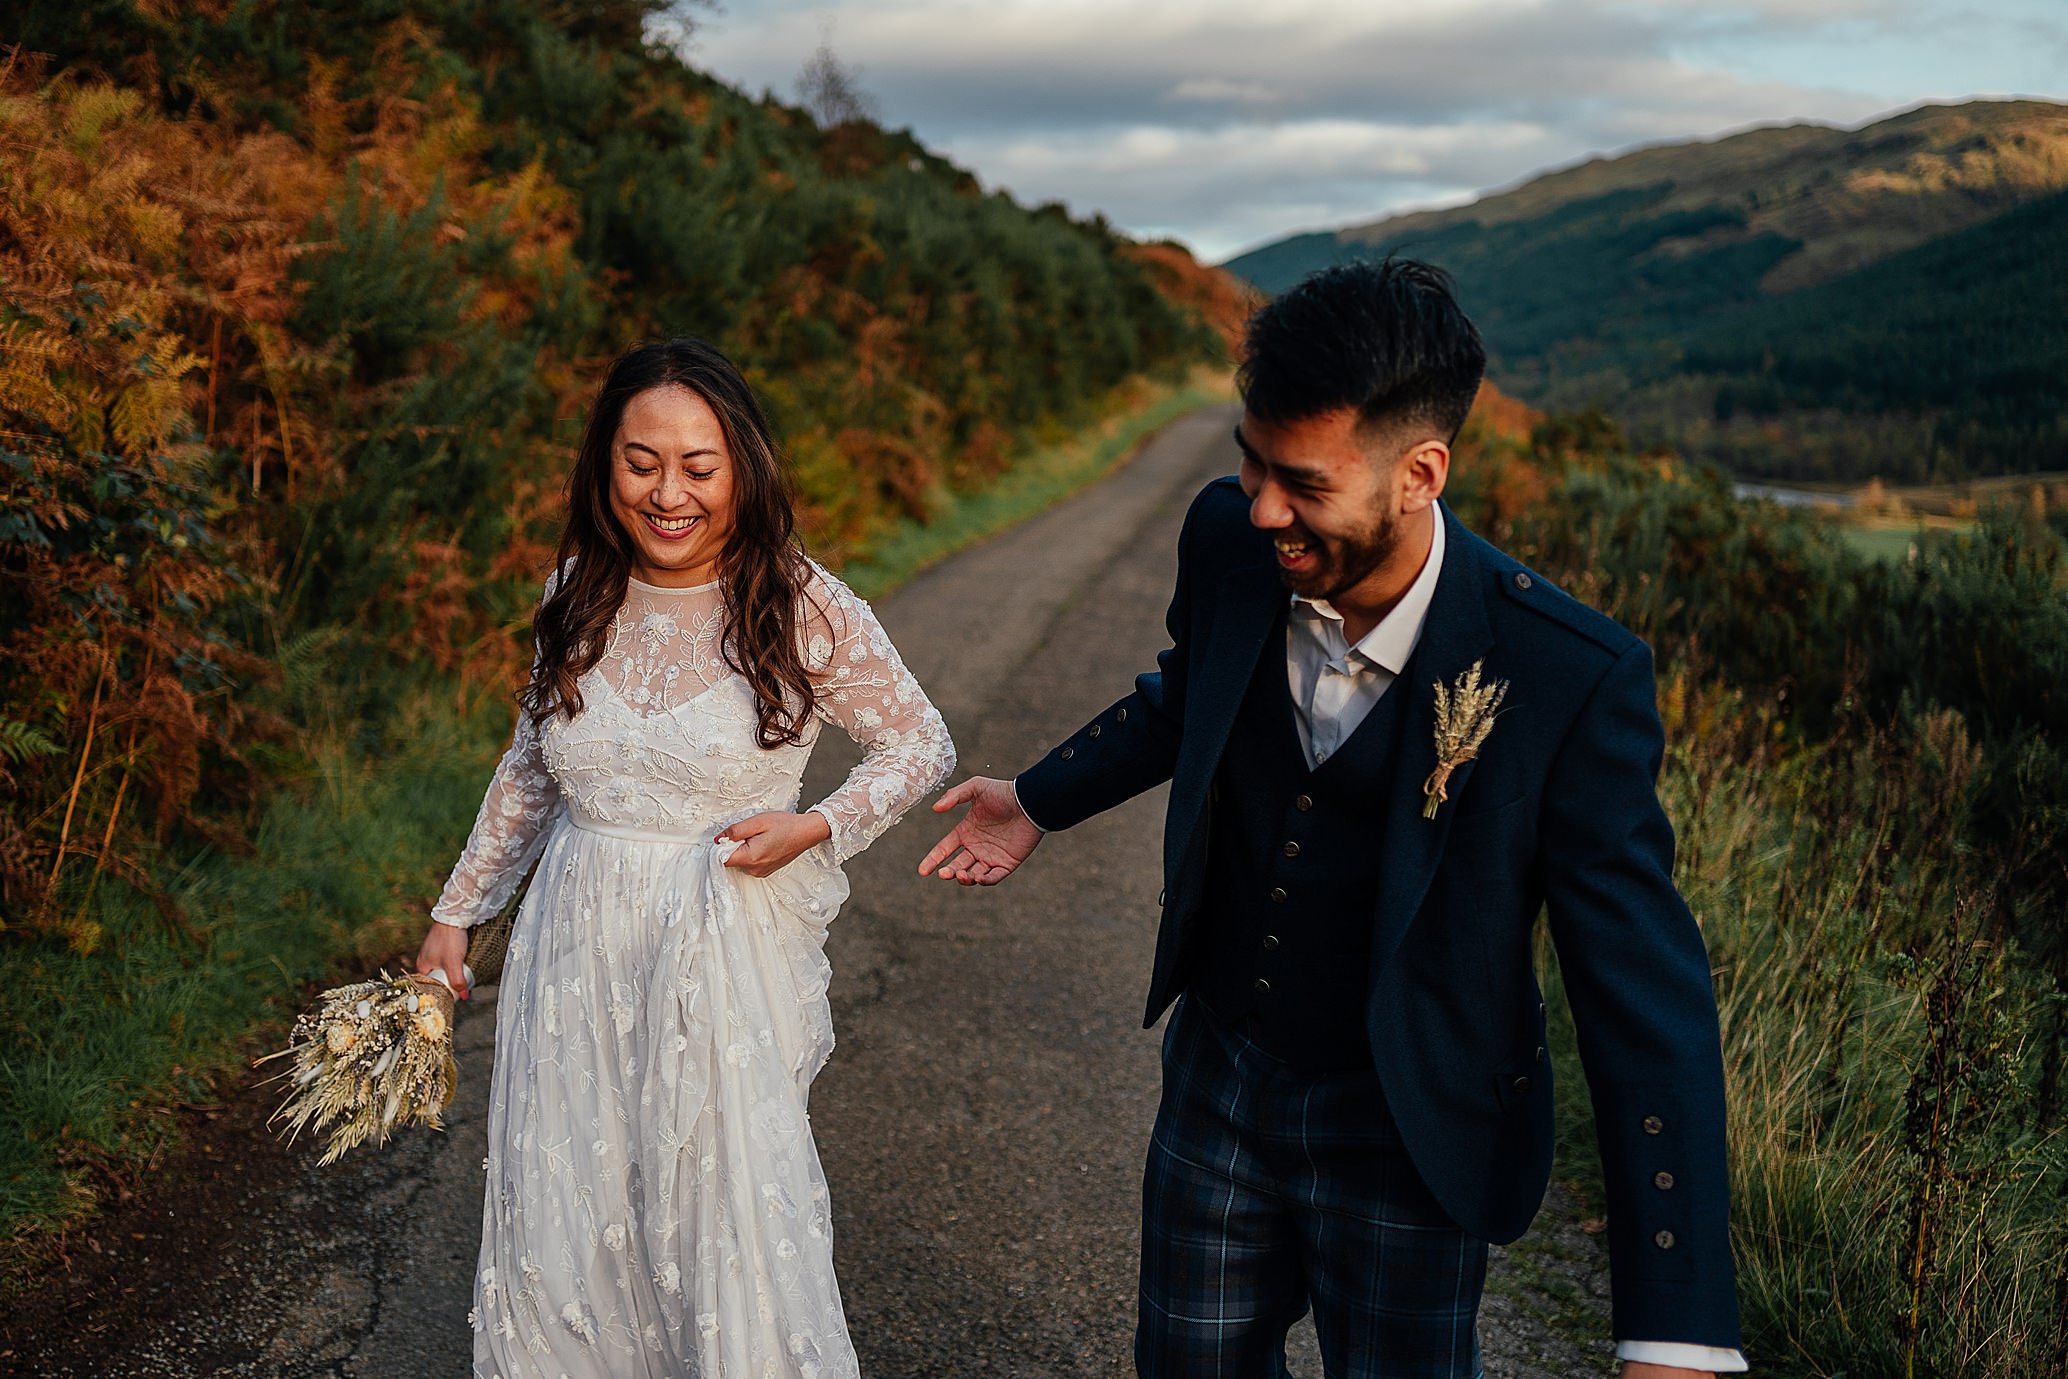 bride in stunning white dress and groom in suit jacket with kilt trousers walking and laughing on country road green banking and mountains in background monachyle mhor wedding photoshoot fotomaki photography